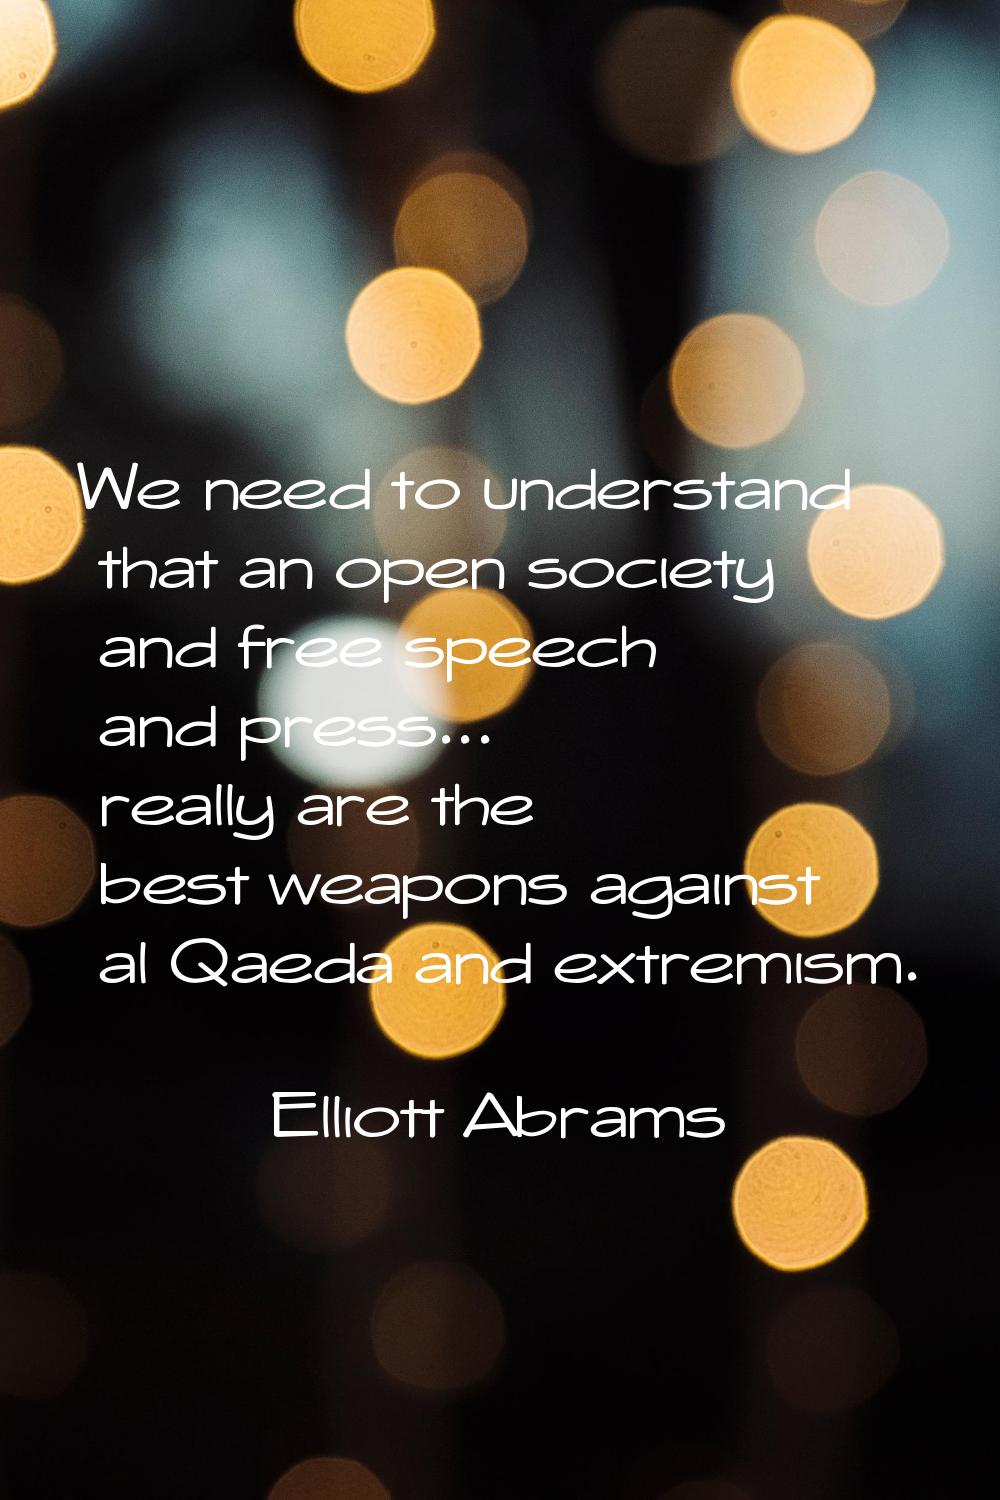 We need to understand that an open society and free speech and press... really are the best weapons